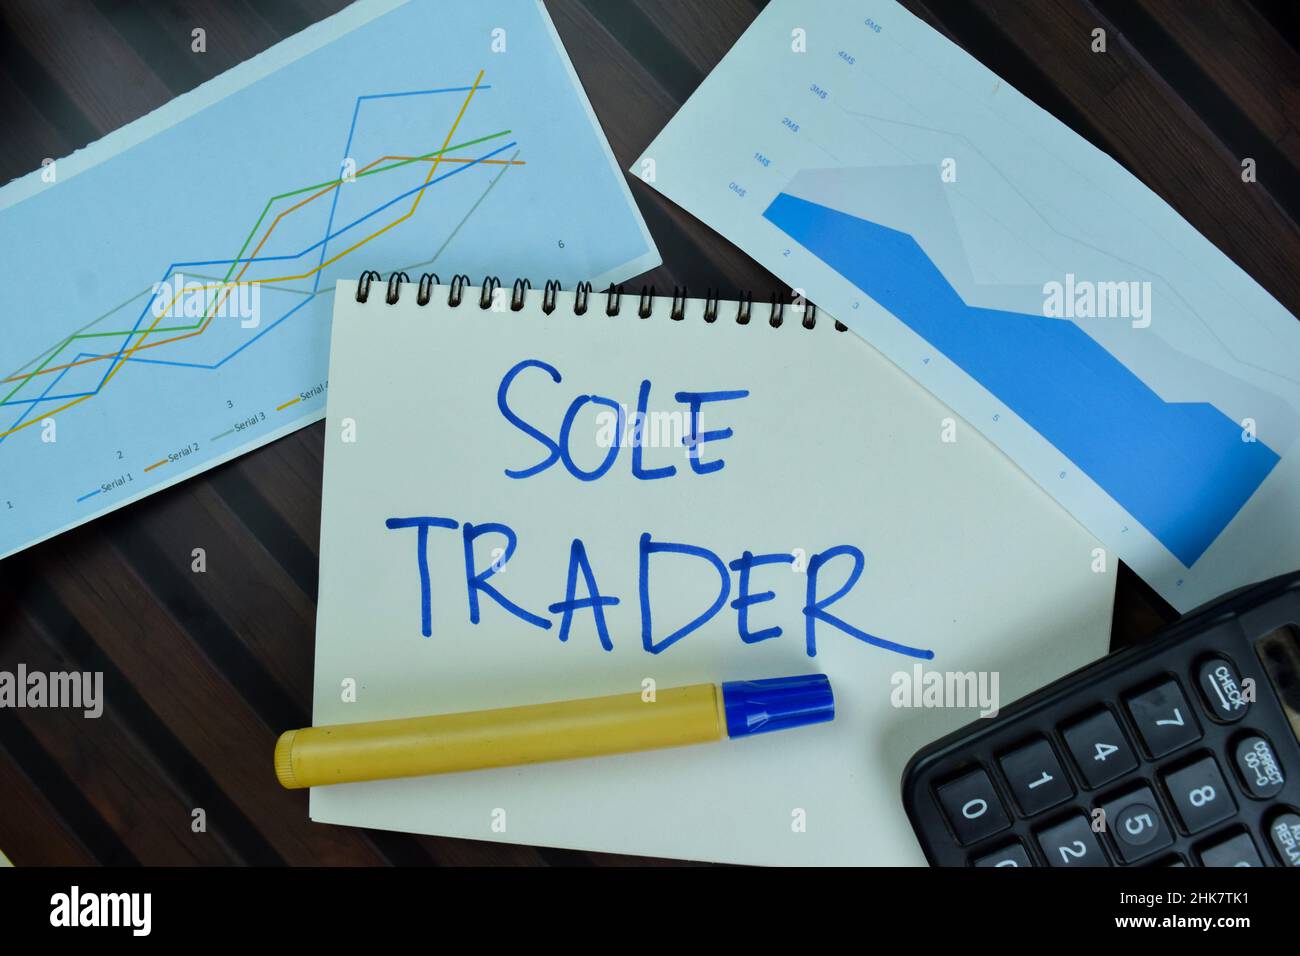 Sole Trader write on a book isolated on Wooden Table. Stock Photo